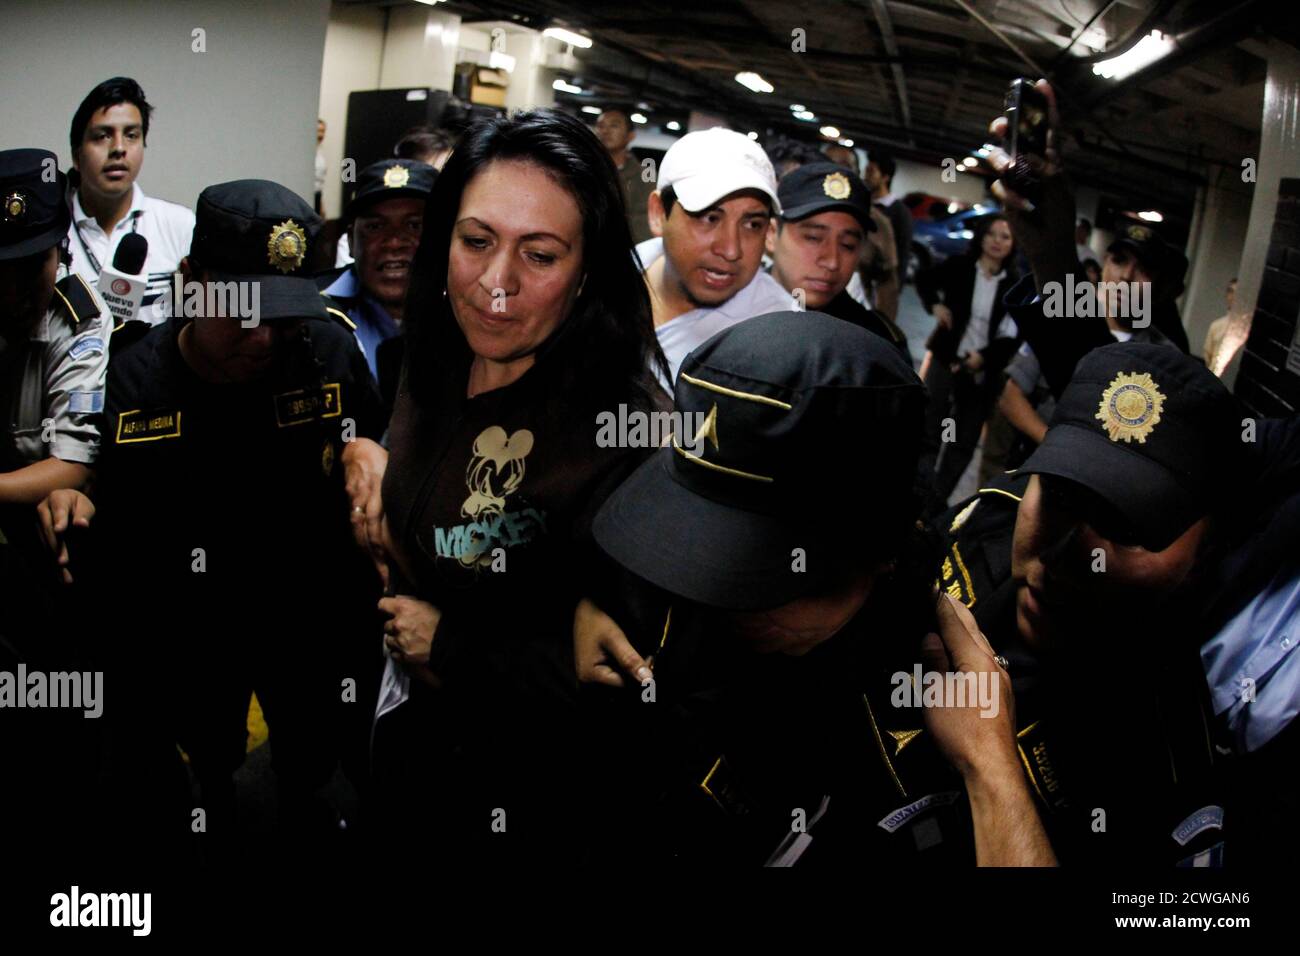 Marlene Blanco Lapola, former Interior vice-minister and former chief of the Guatemalan Police during the years 2008-2012, is escorted by police officers after her arrest for charges of conspiracy and extra-judicial execution in the Supreme Court of Justice of Guatemala City March 23, 2012. Blanco Lapola is charged for cases involving the deaths of three people in relation to extortion of transportation entrepreneurs in operations known as 'social cleansing' in 2009, according to local media. REUTERS/Jorge Dan Lopez (GUATEMALA - Tags: CRIME LAW POLITICS) Stock Photo